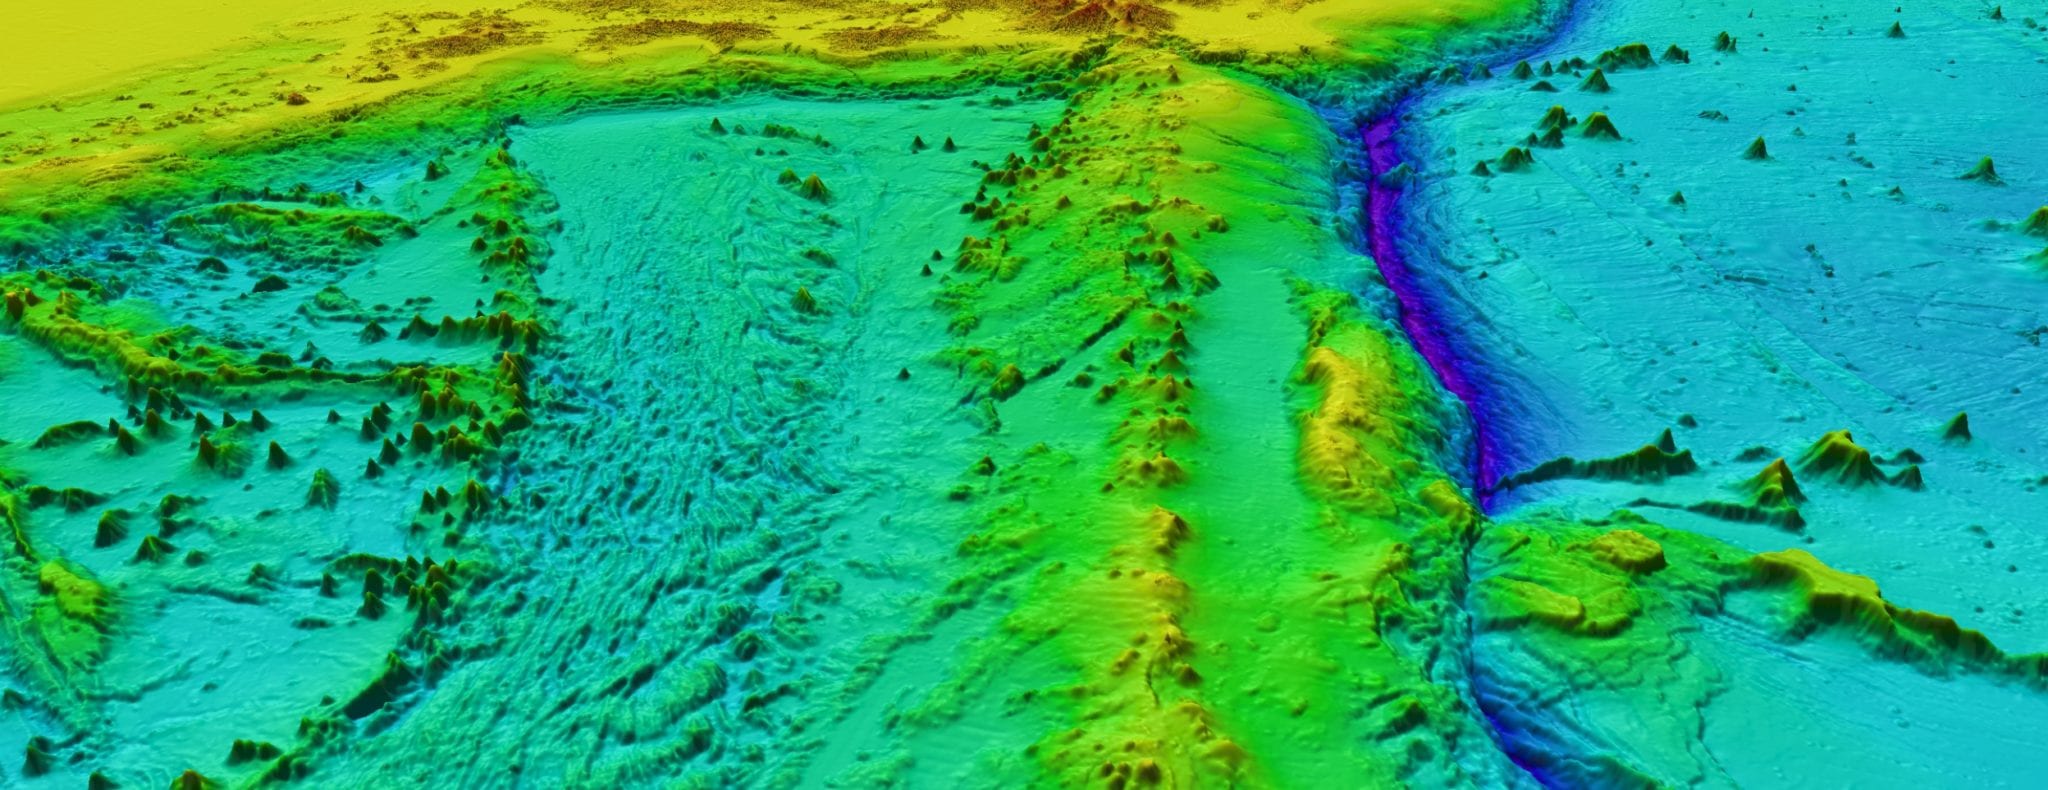 This is an image of the Pacific Ocean floor, from the Seabed 2030 project.